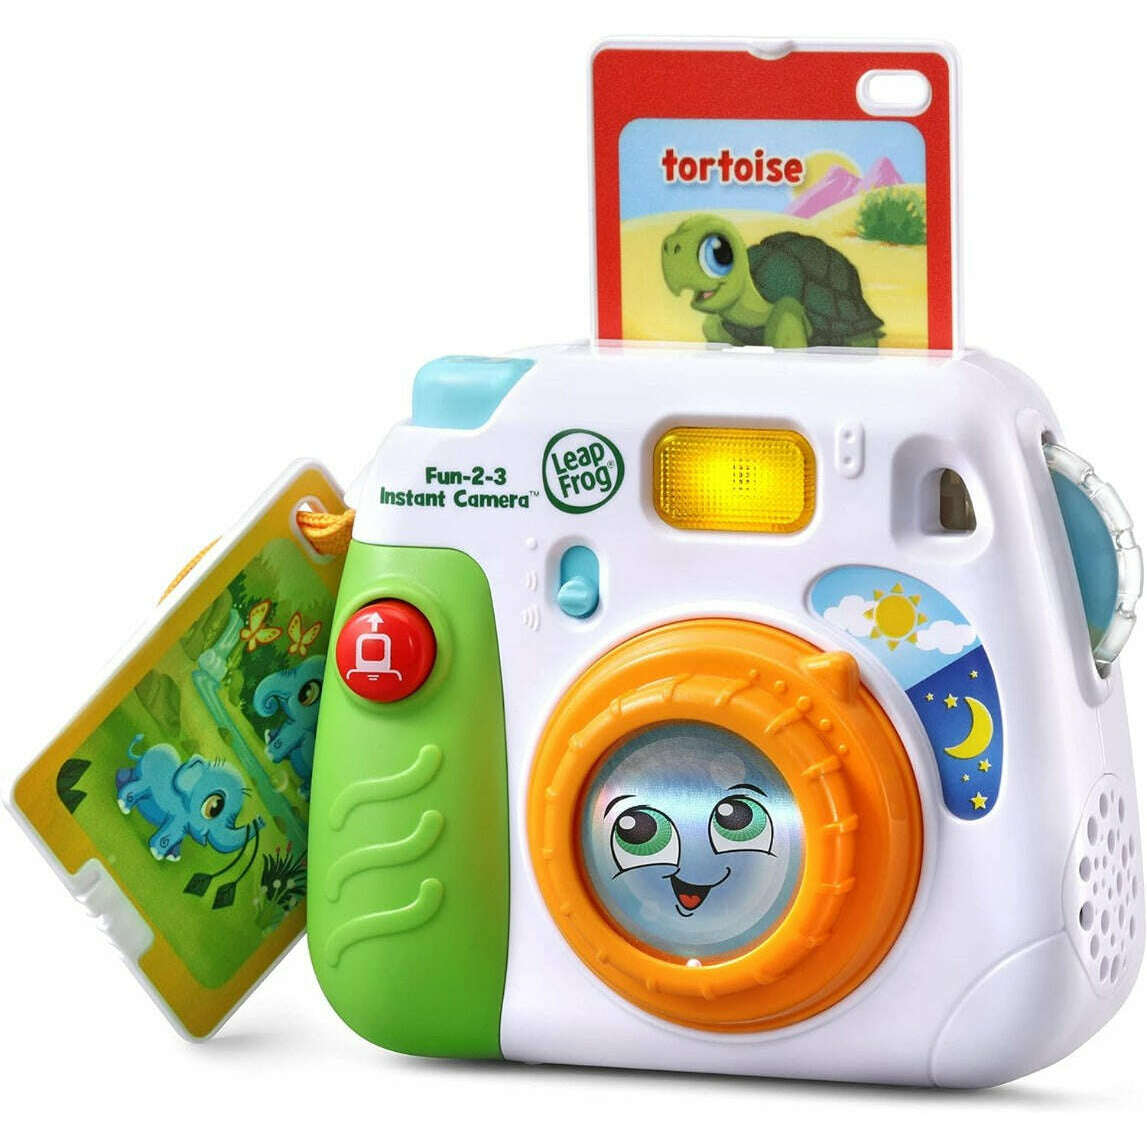 Toys N Tuck:LeapFrog Fun-2-3 Instant Camera,Leap Frog